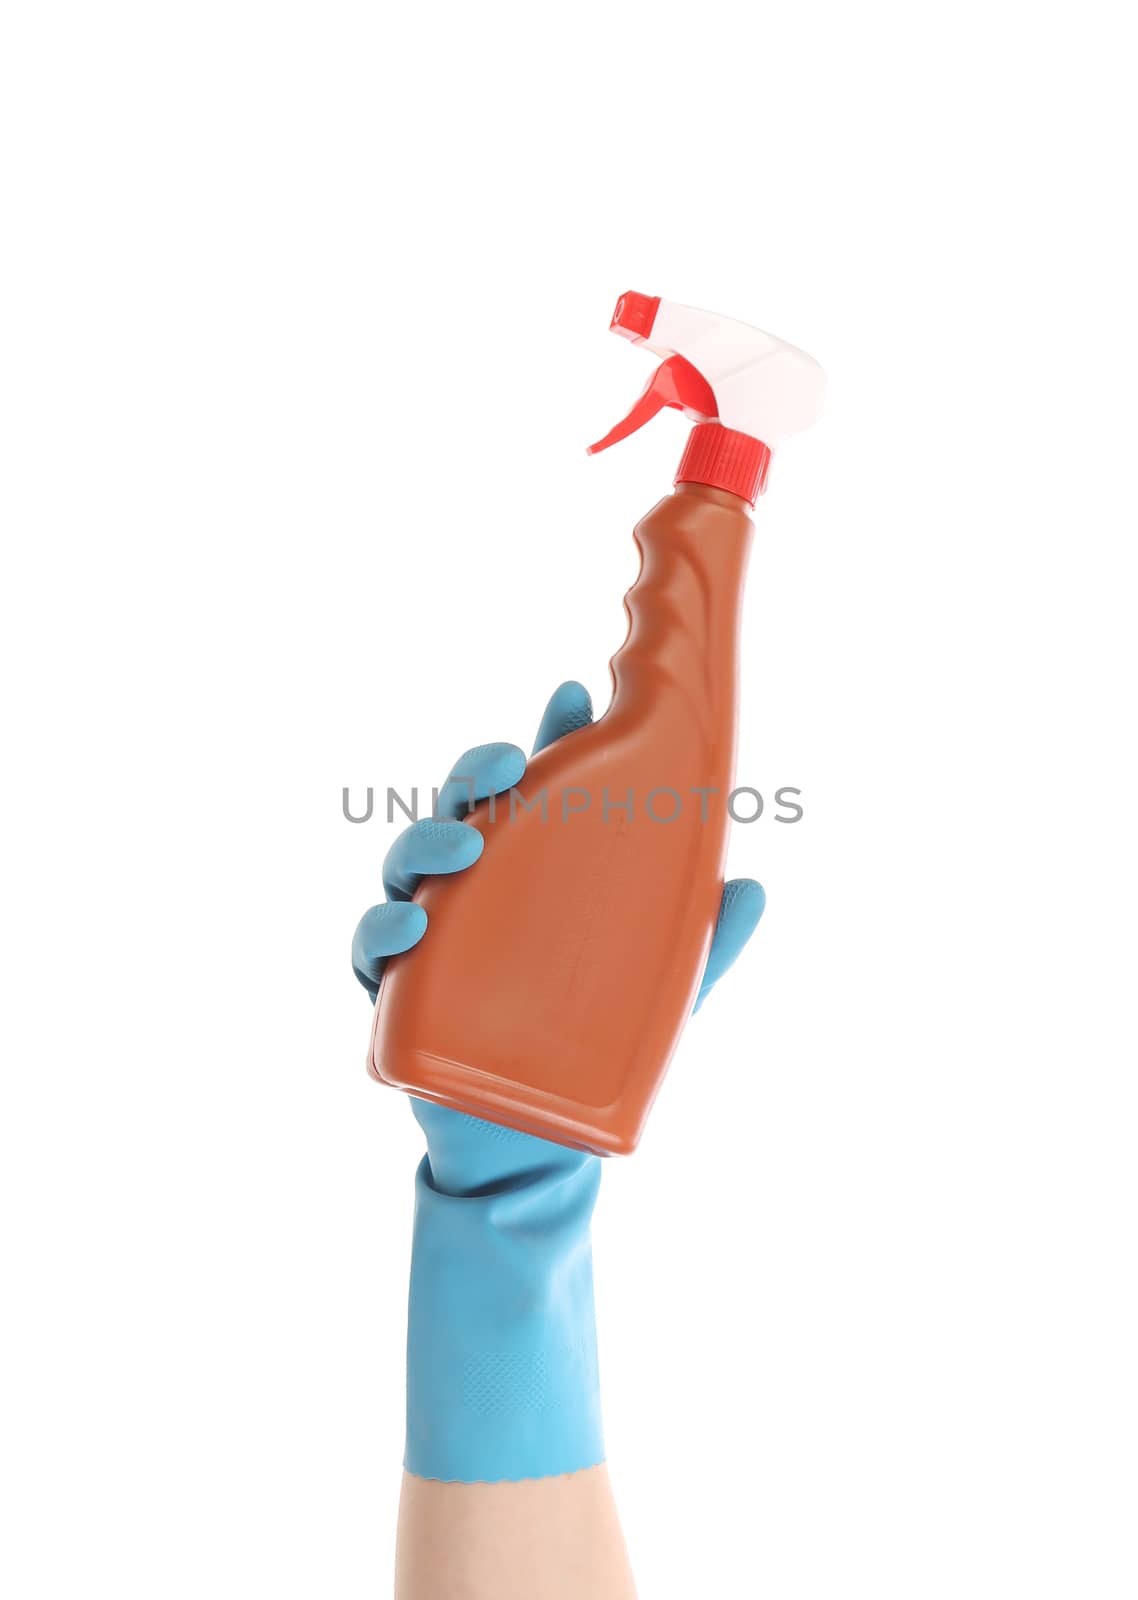 Hand in glove holding brown plastic spray bottle. Isolated on a white background.